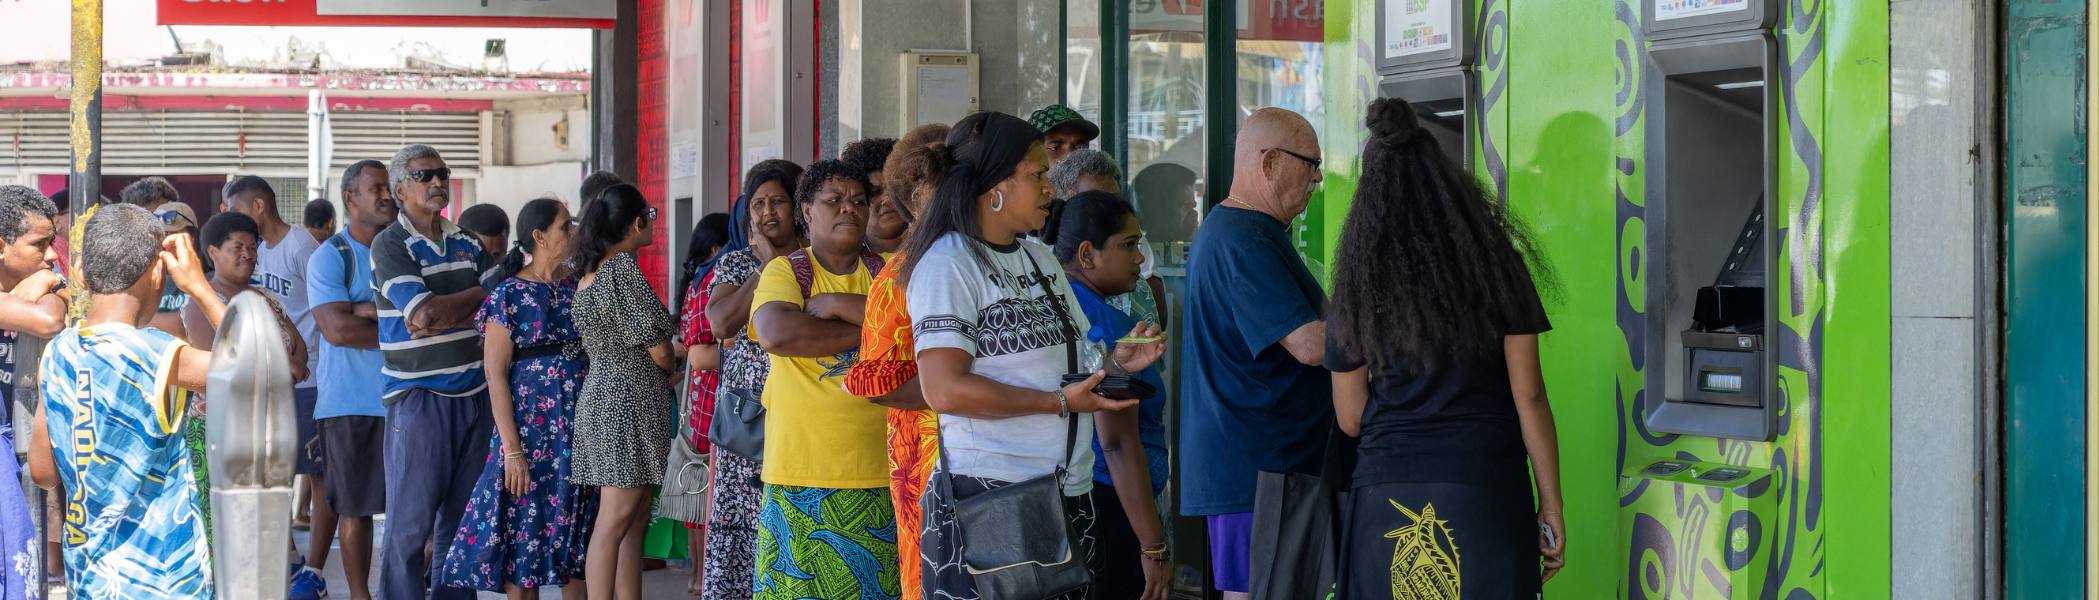 Long line of people waiting to withdraw cash from ATM in Fiji